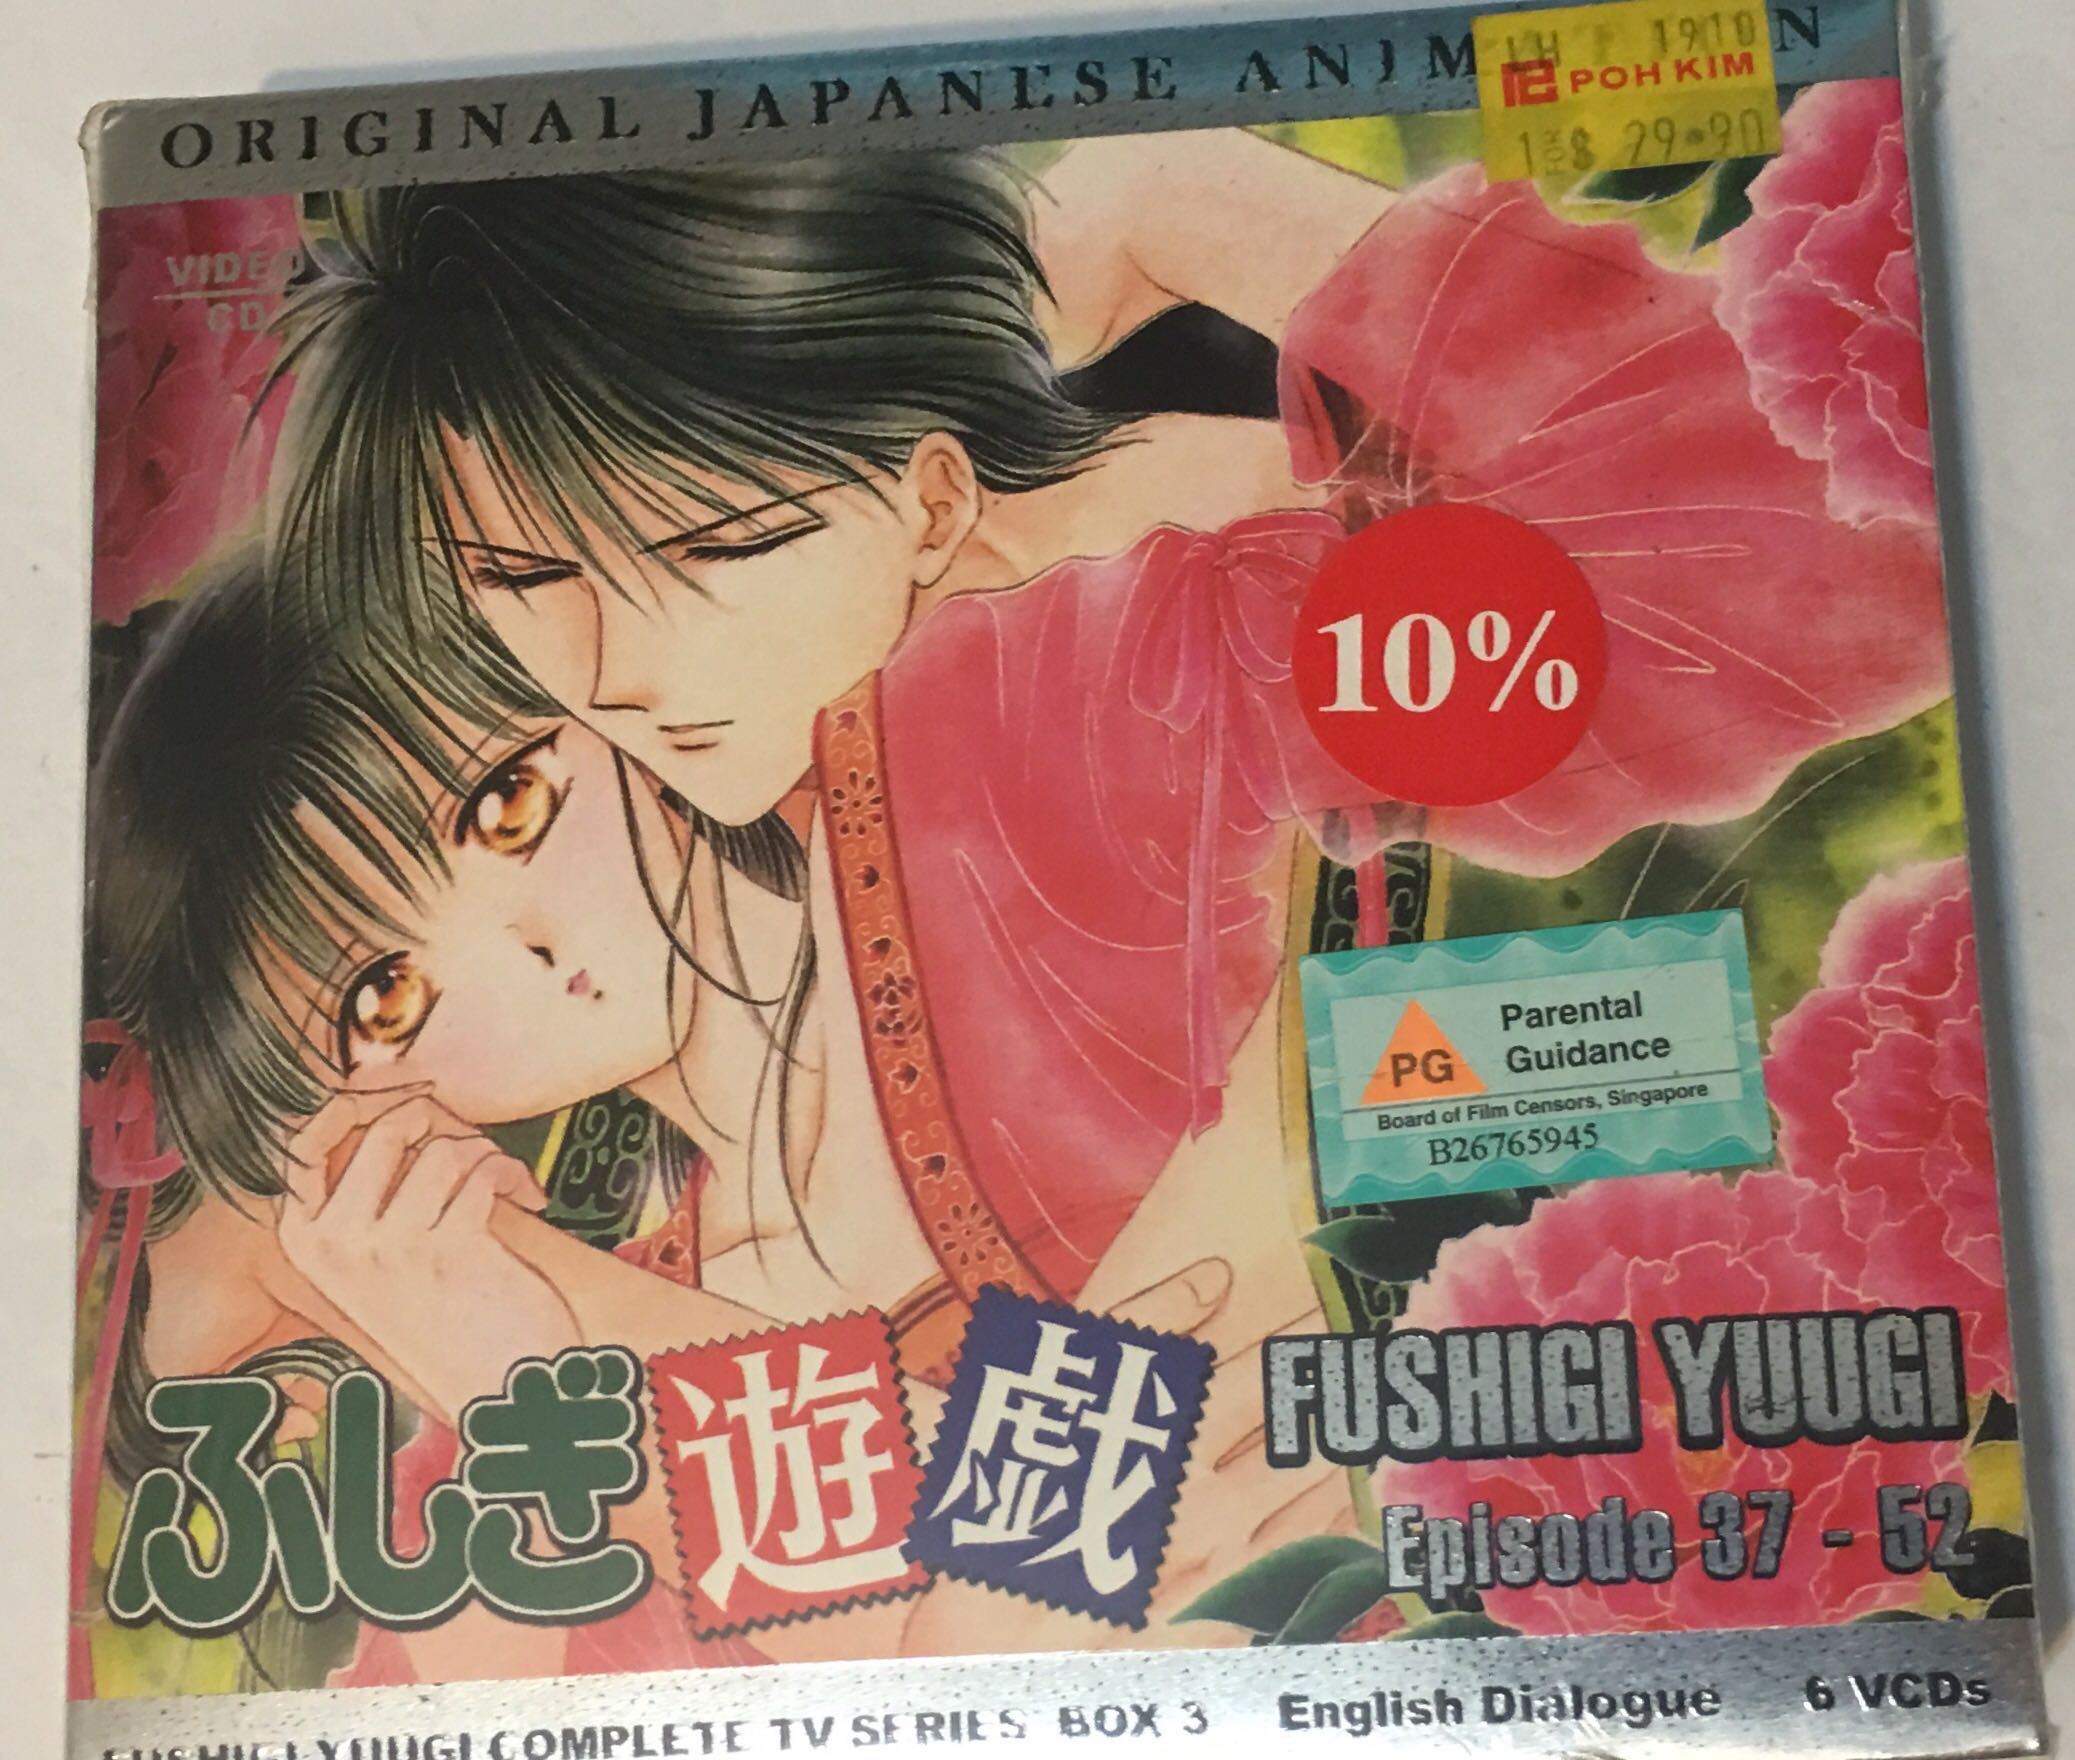 Original Fushigi Yuugi Japanese Anime Ep 37 52 Vcd Hobbies And Toys Music And Media Cds And Dvds On 4721